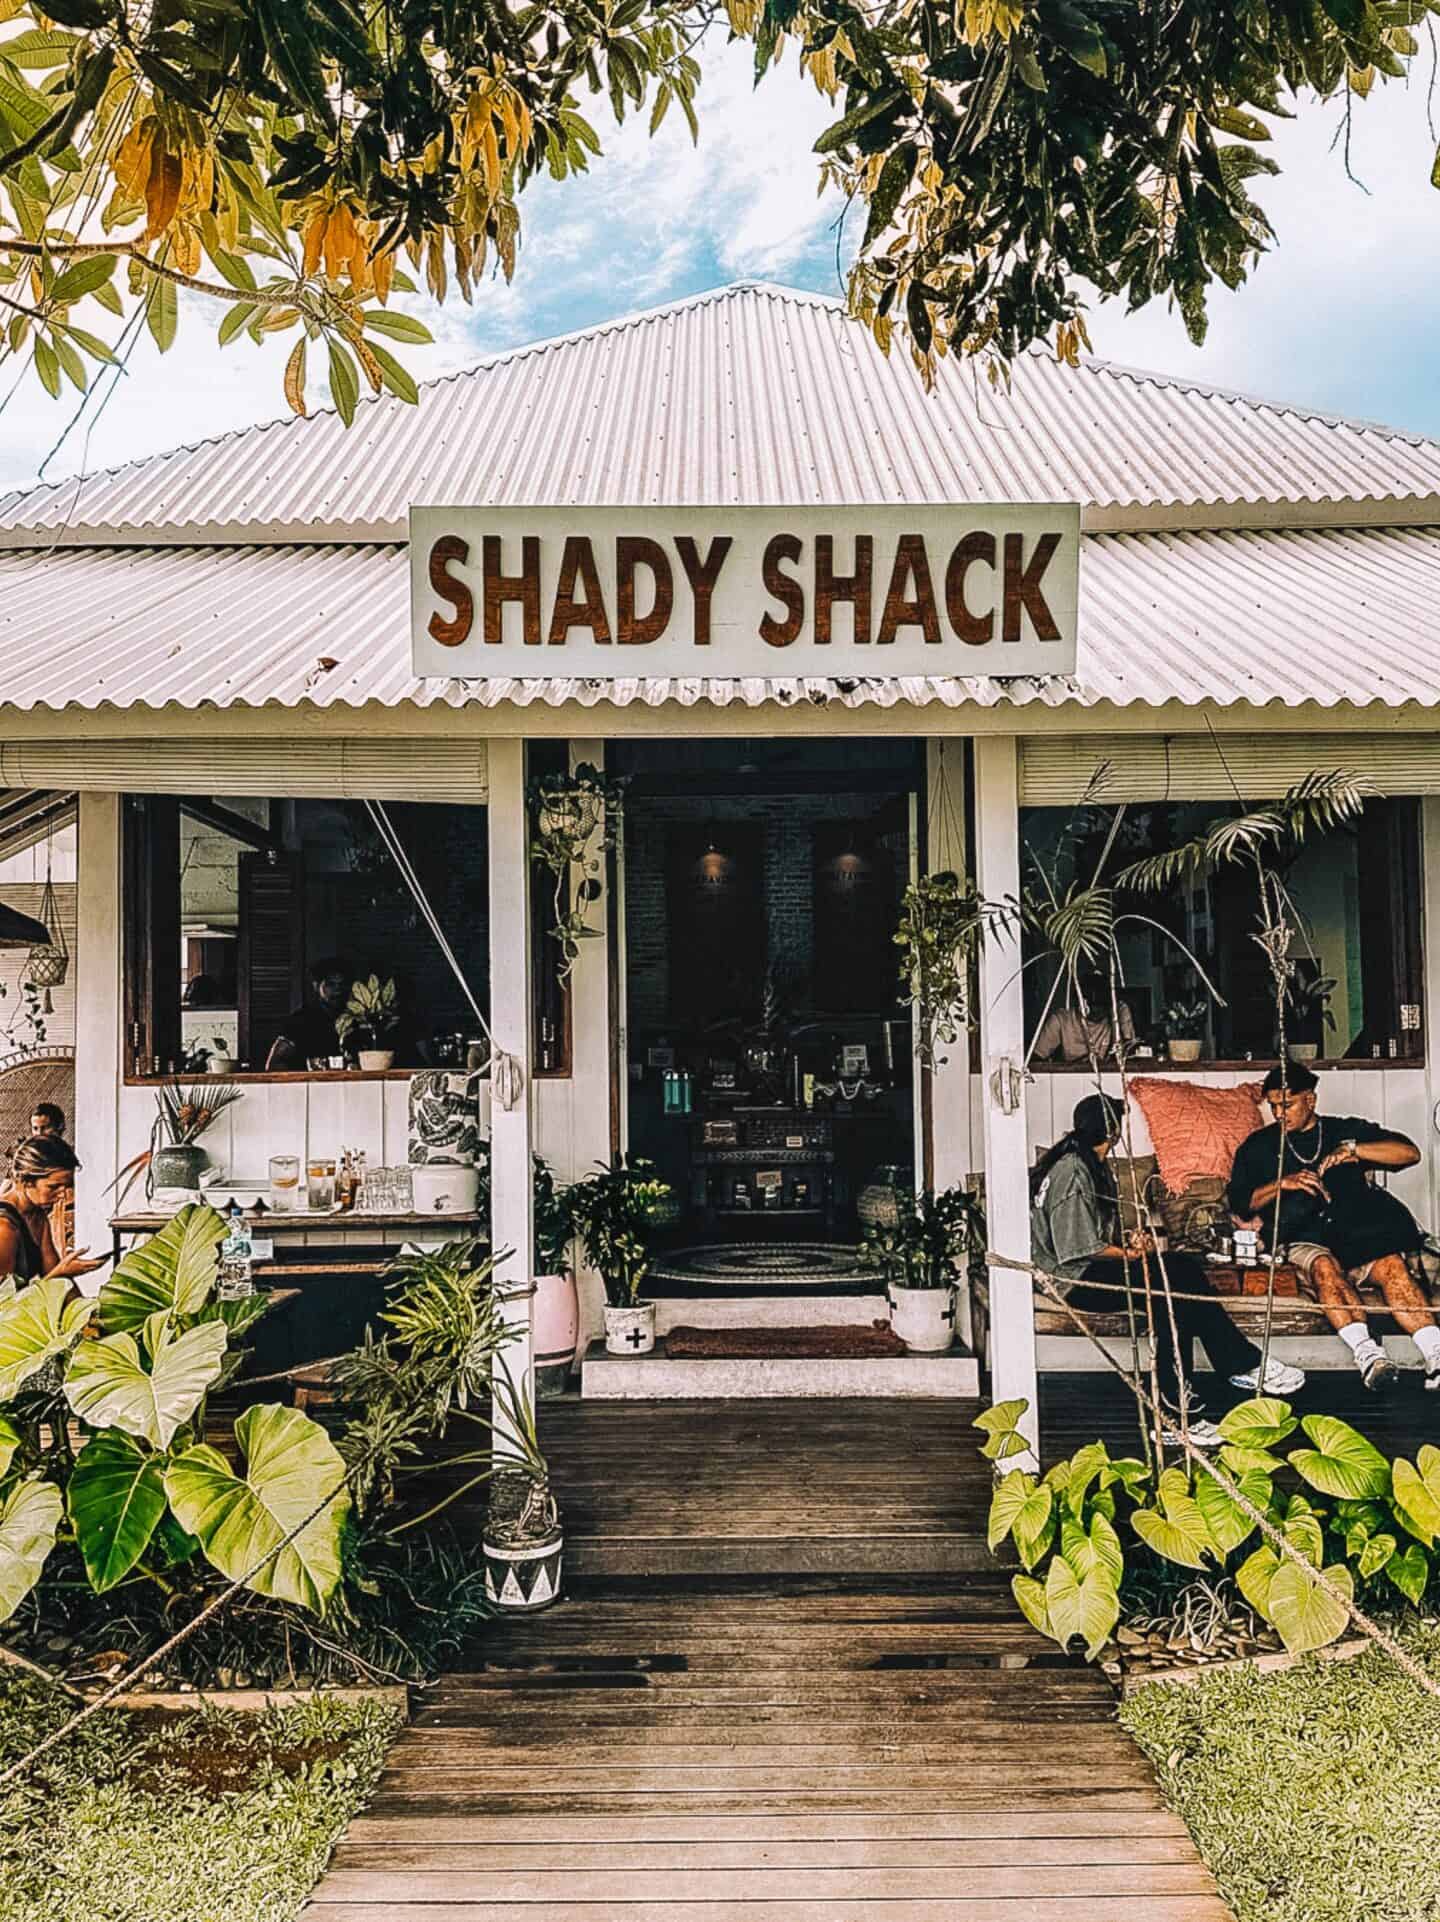 You can find some of the best breakfast in Canggu at the Shady Shack